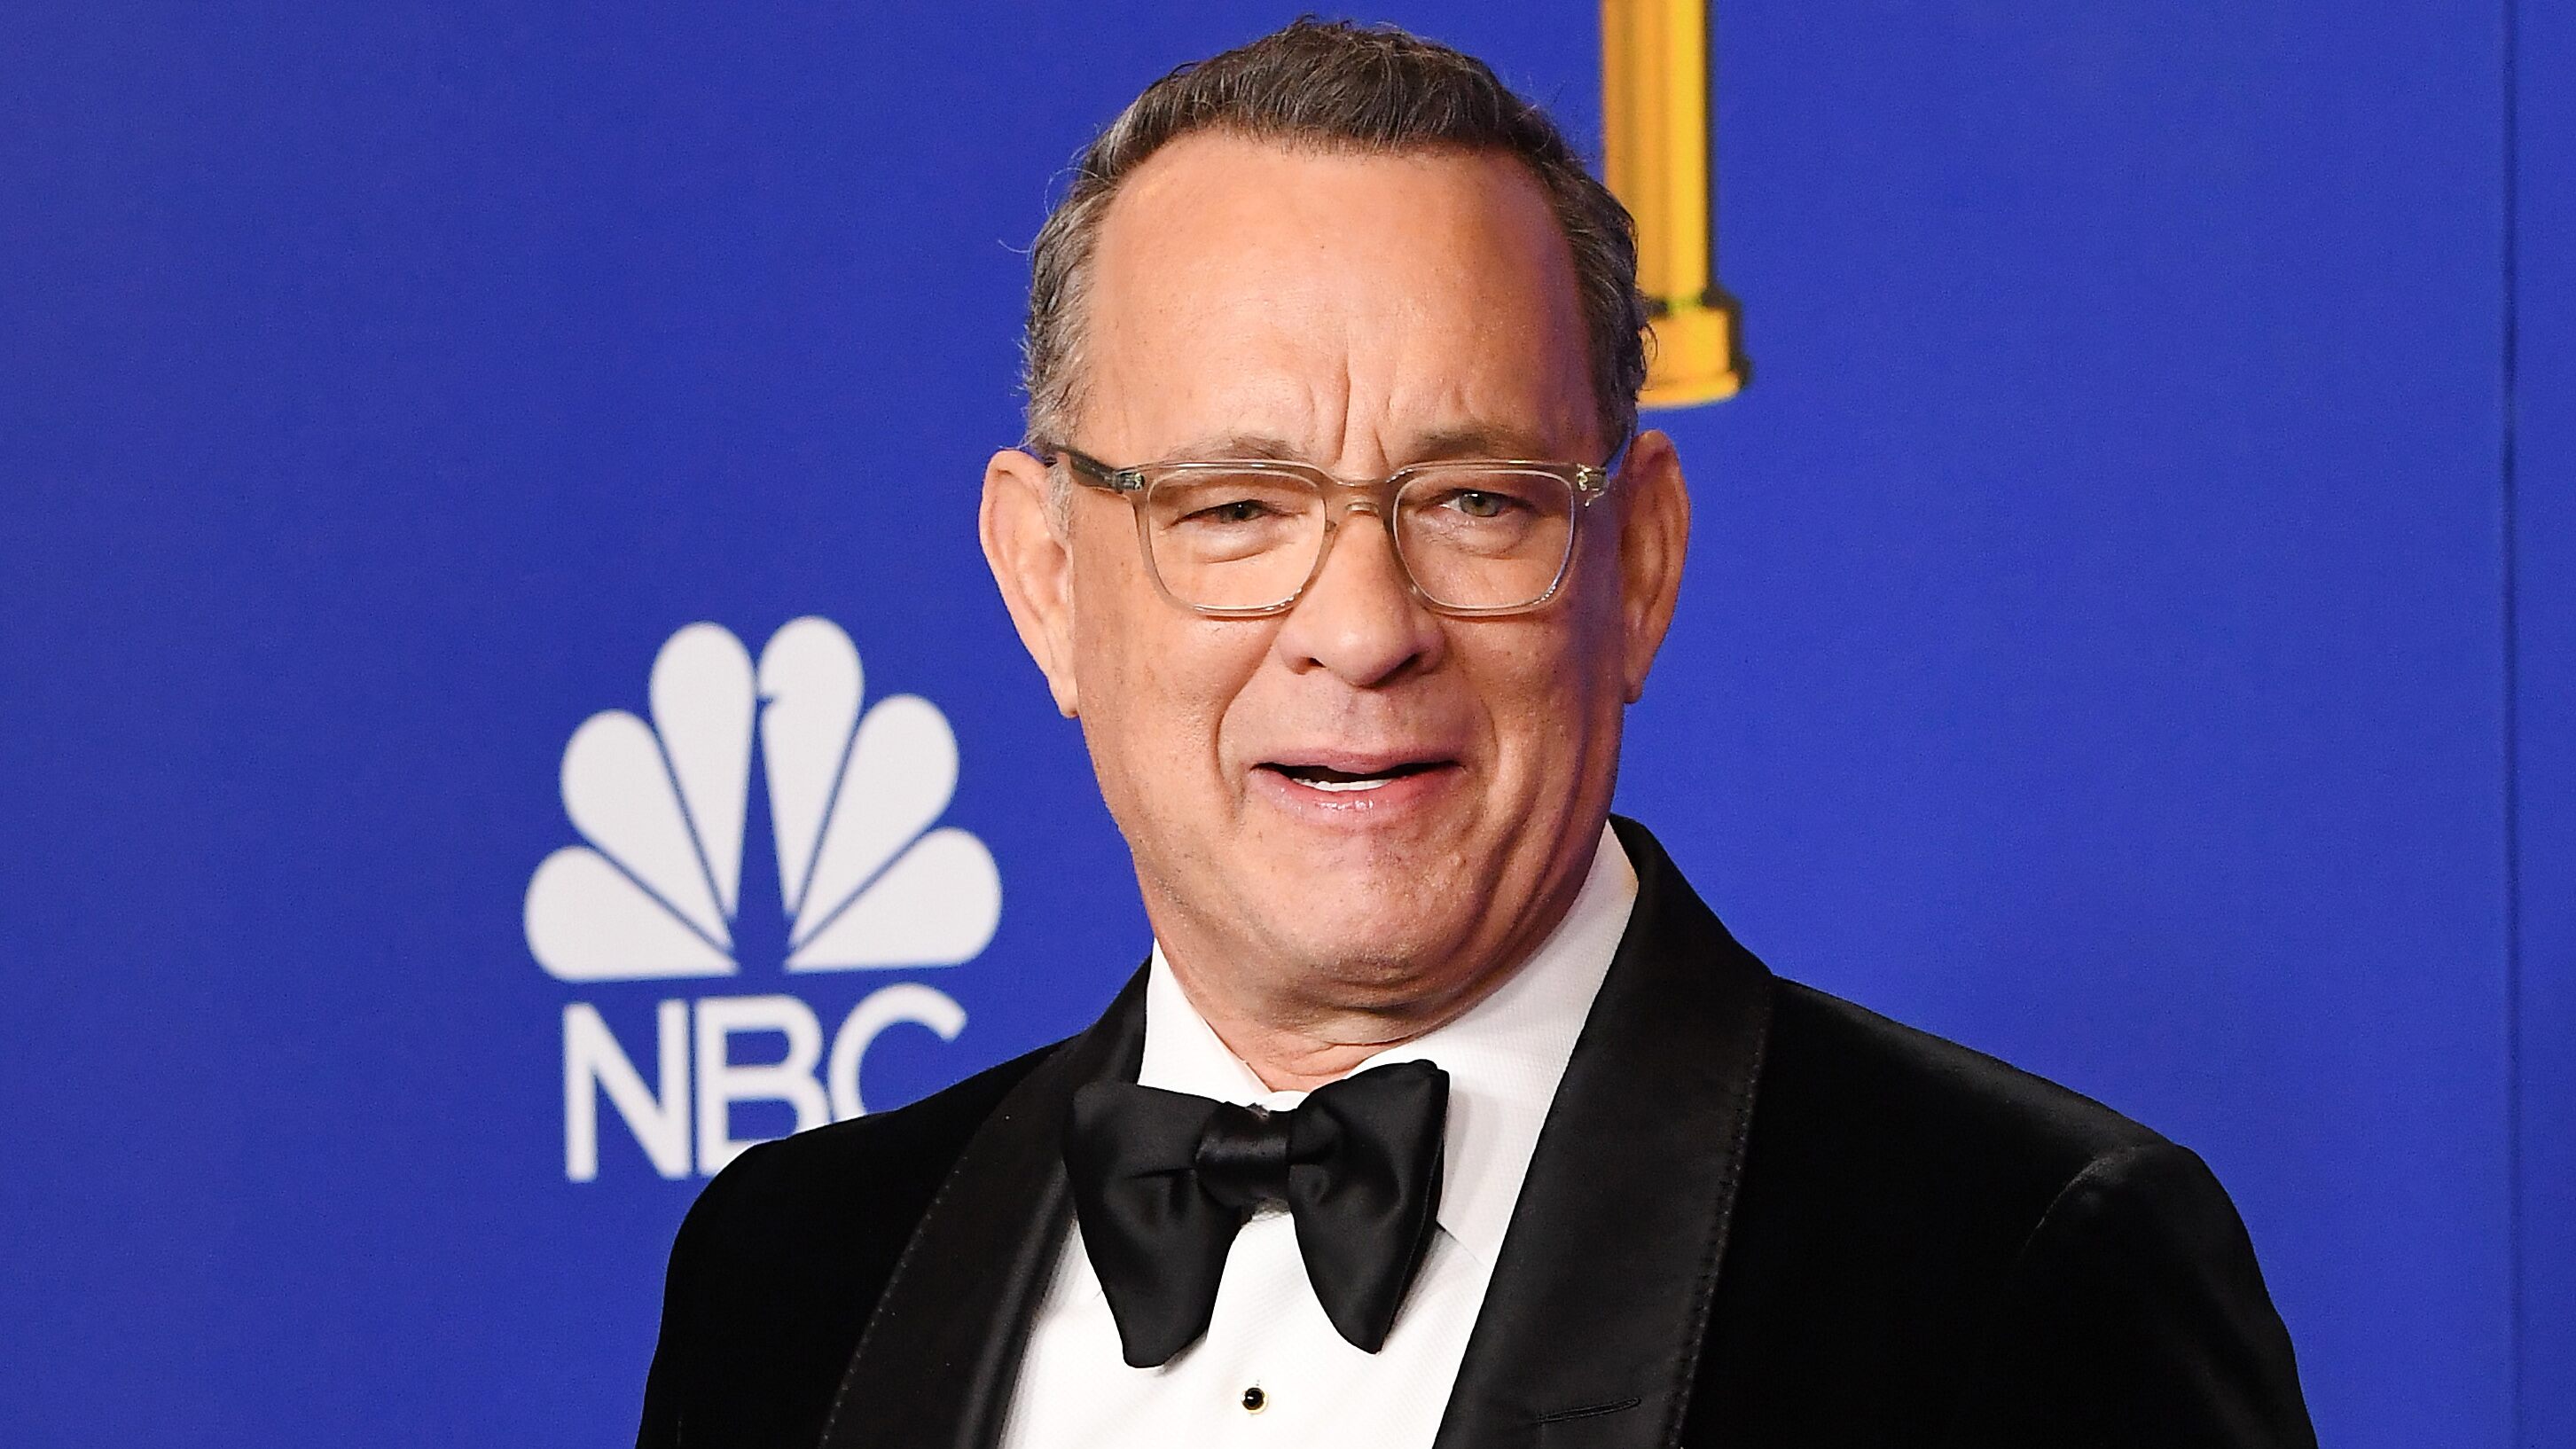 Tom Hanks addresses successful, scandal-free career at the Golden Globe Awards: 'There's no strategy to it' - www.foxnews.com